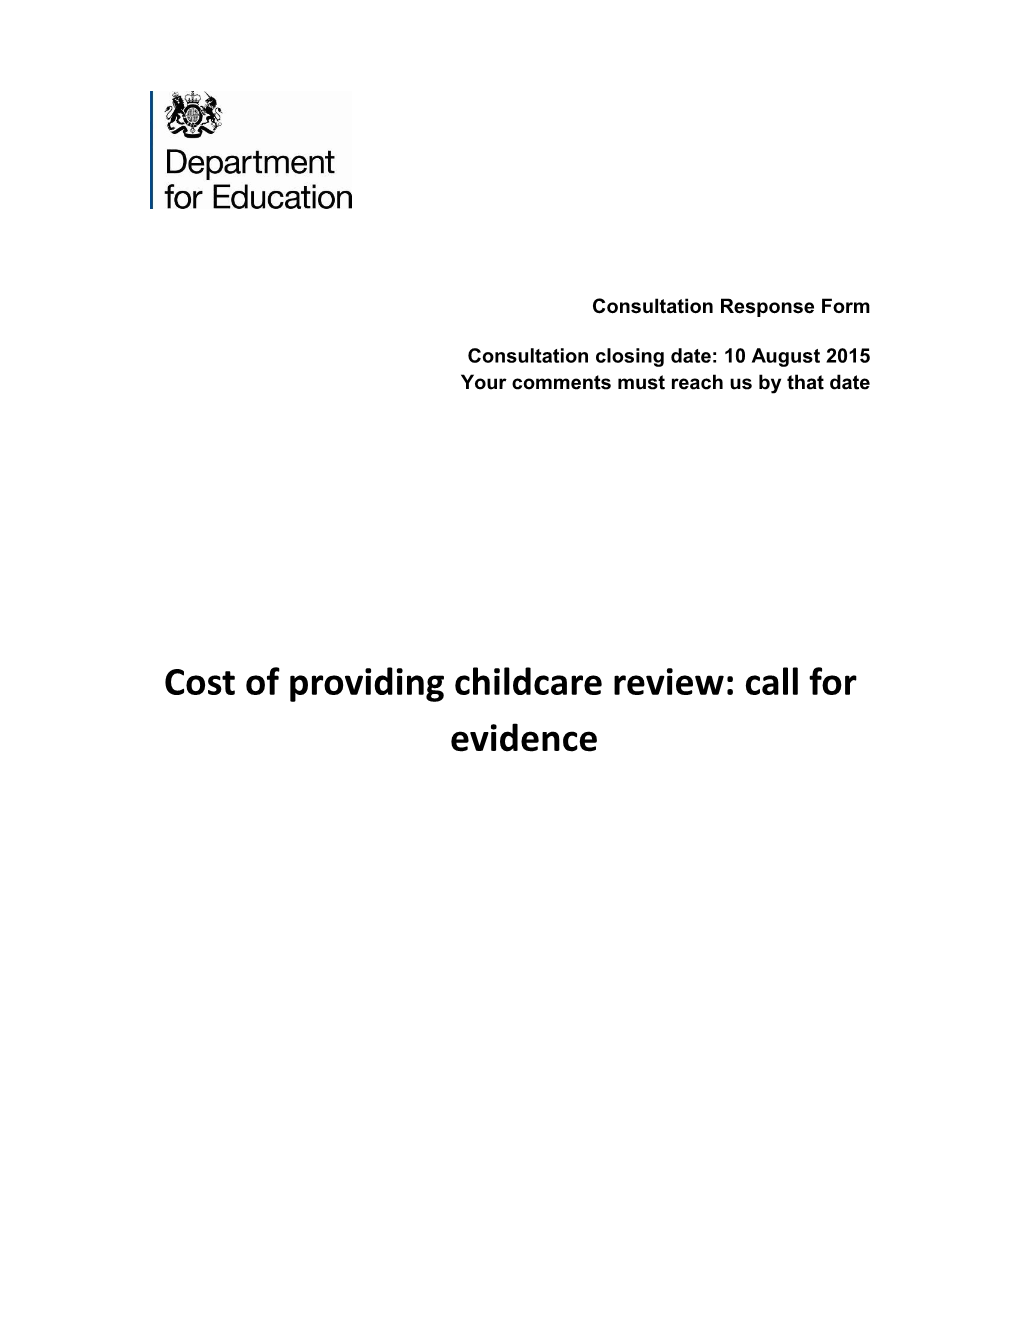 Cost of Providing Childcare Review: Call for Evidence